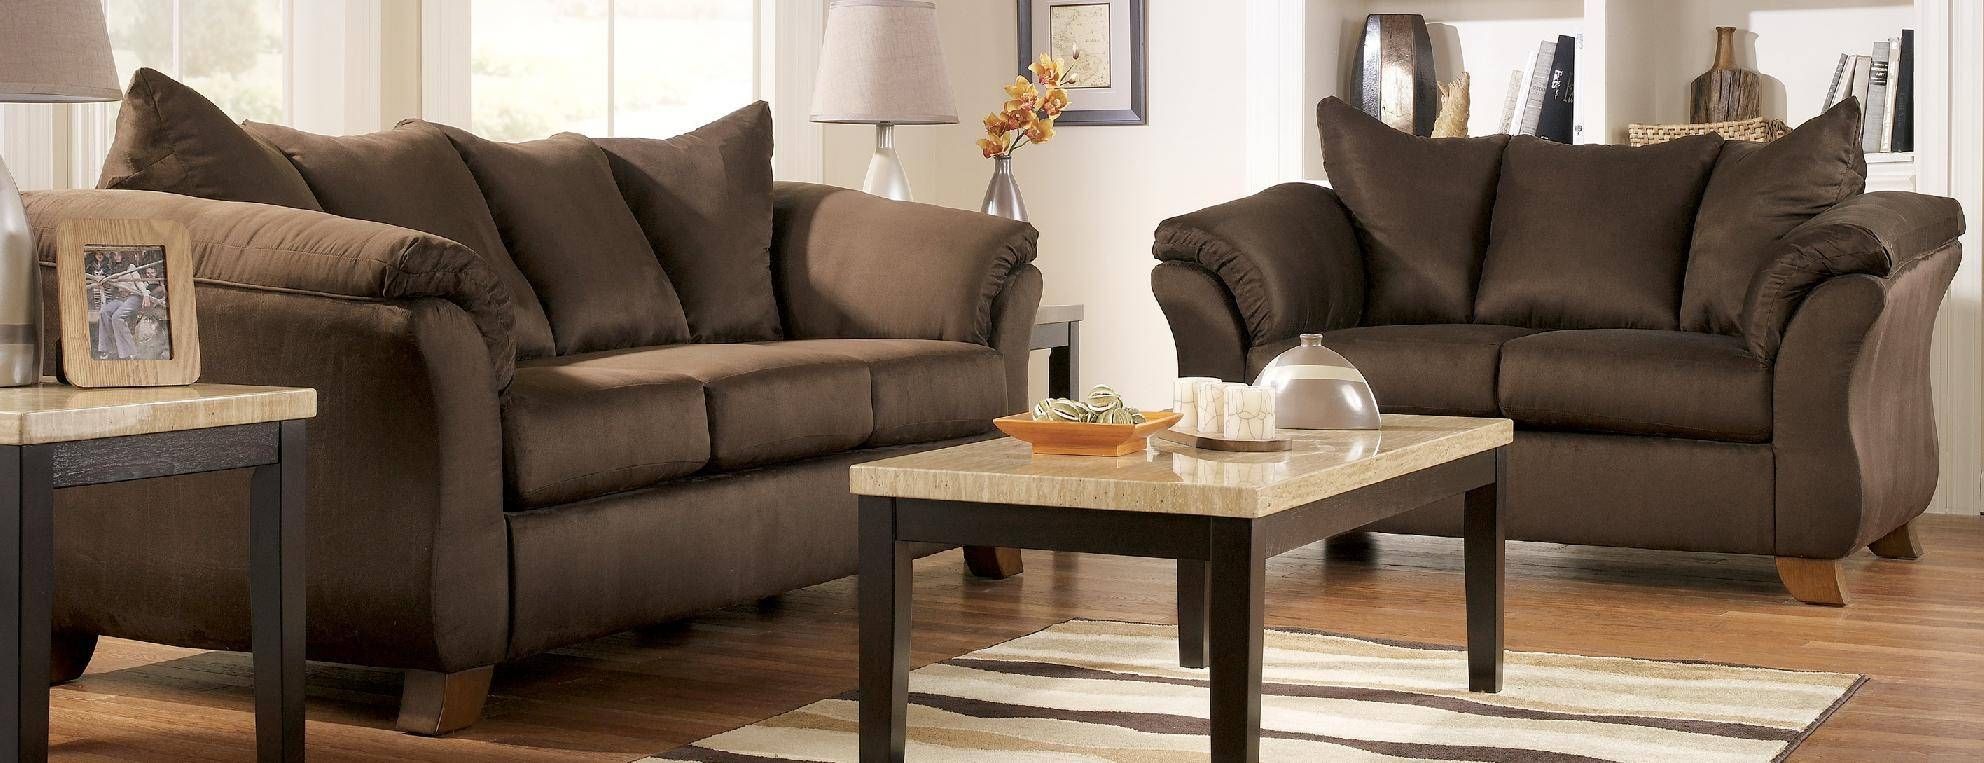 Cheap Furniture Online Cheap Living Room Furniture Sets Ideas Intended For Cheap Sofa Chairs (View 6 of 30)